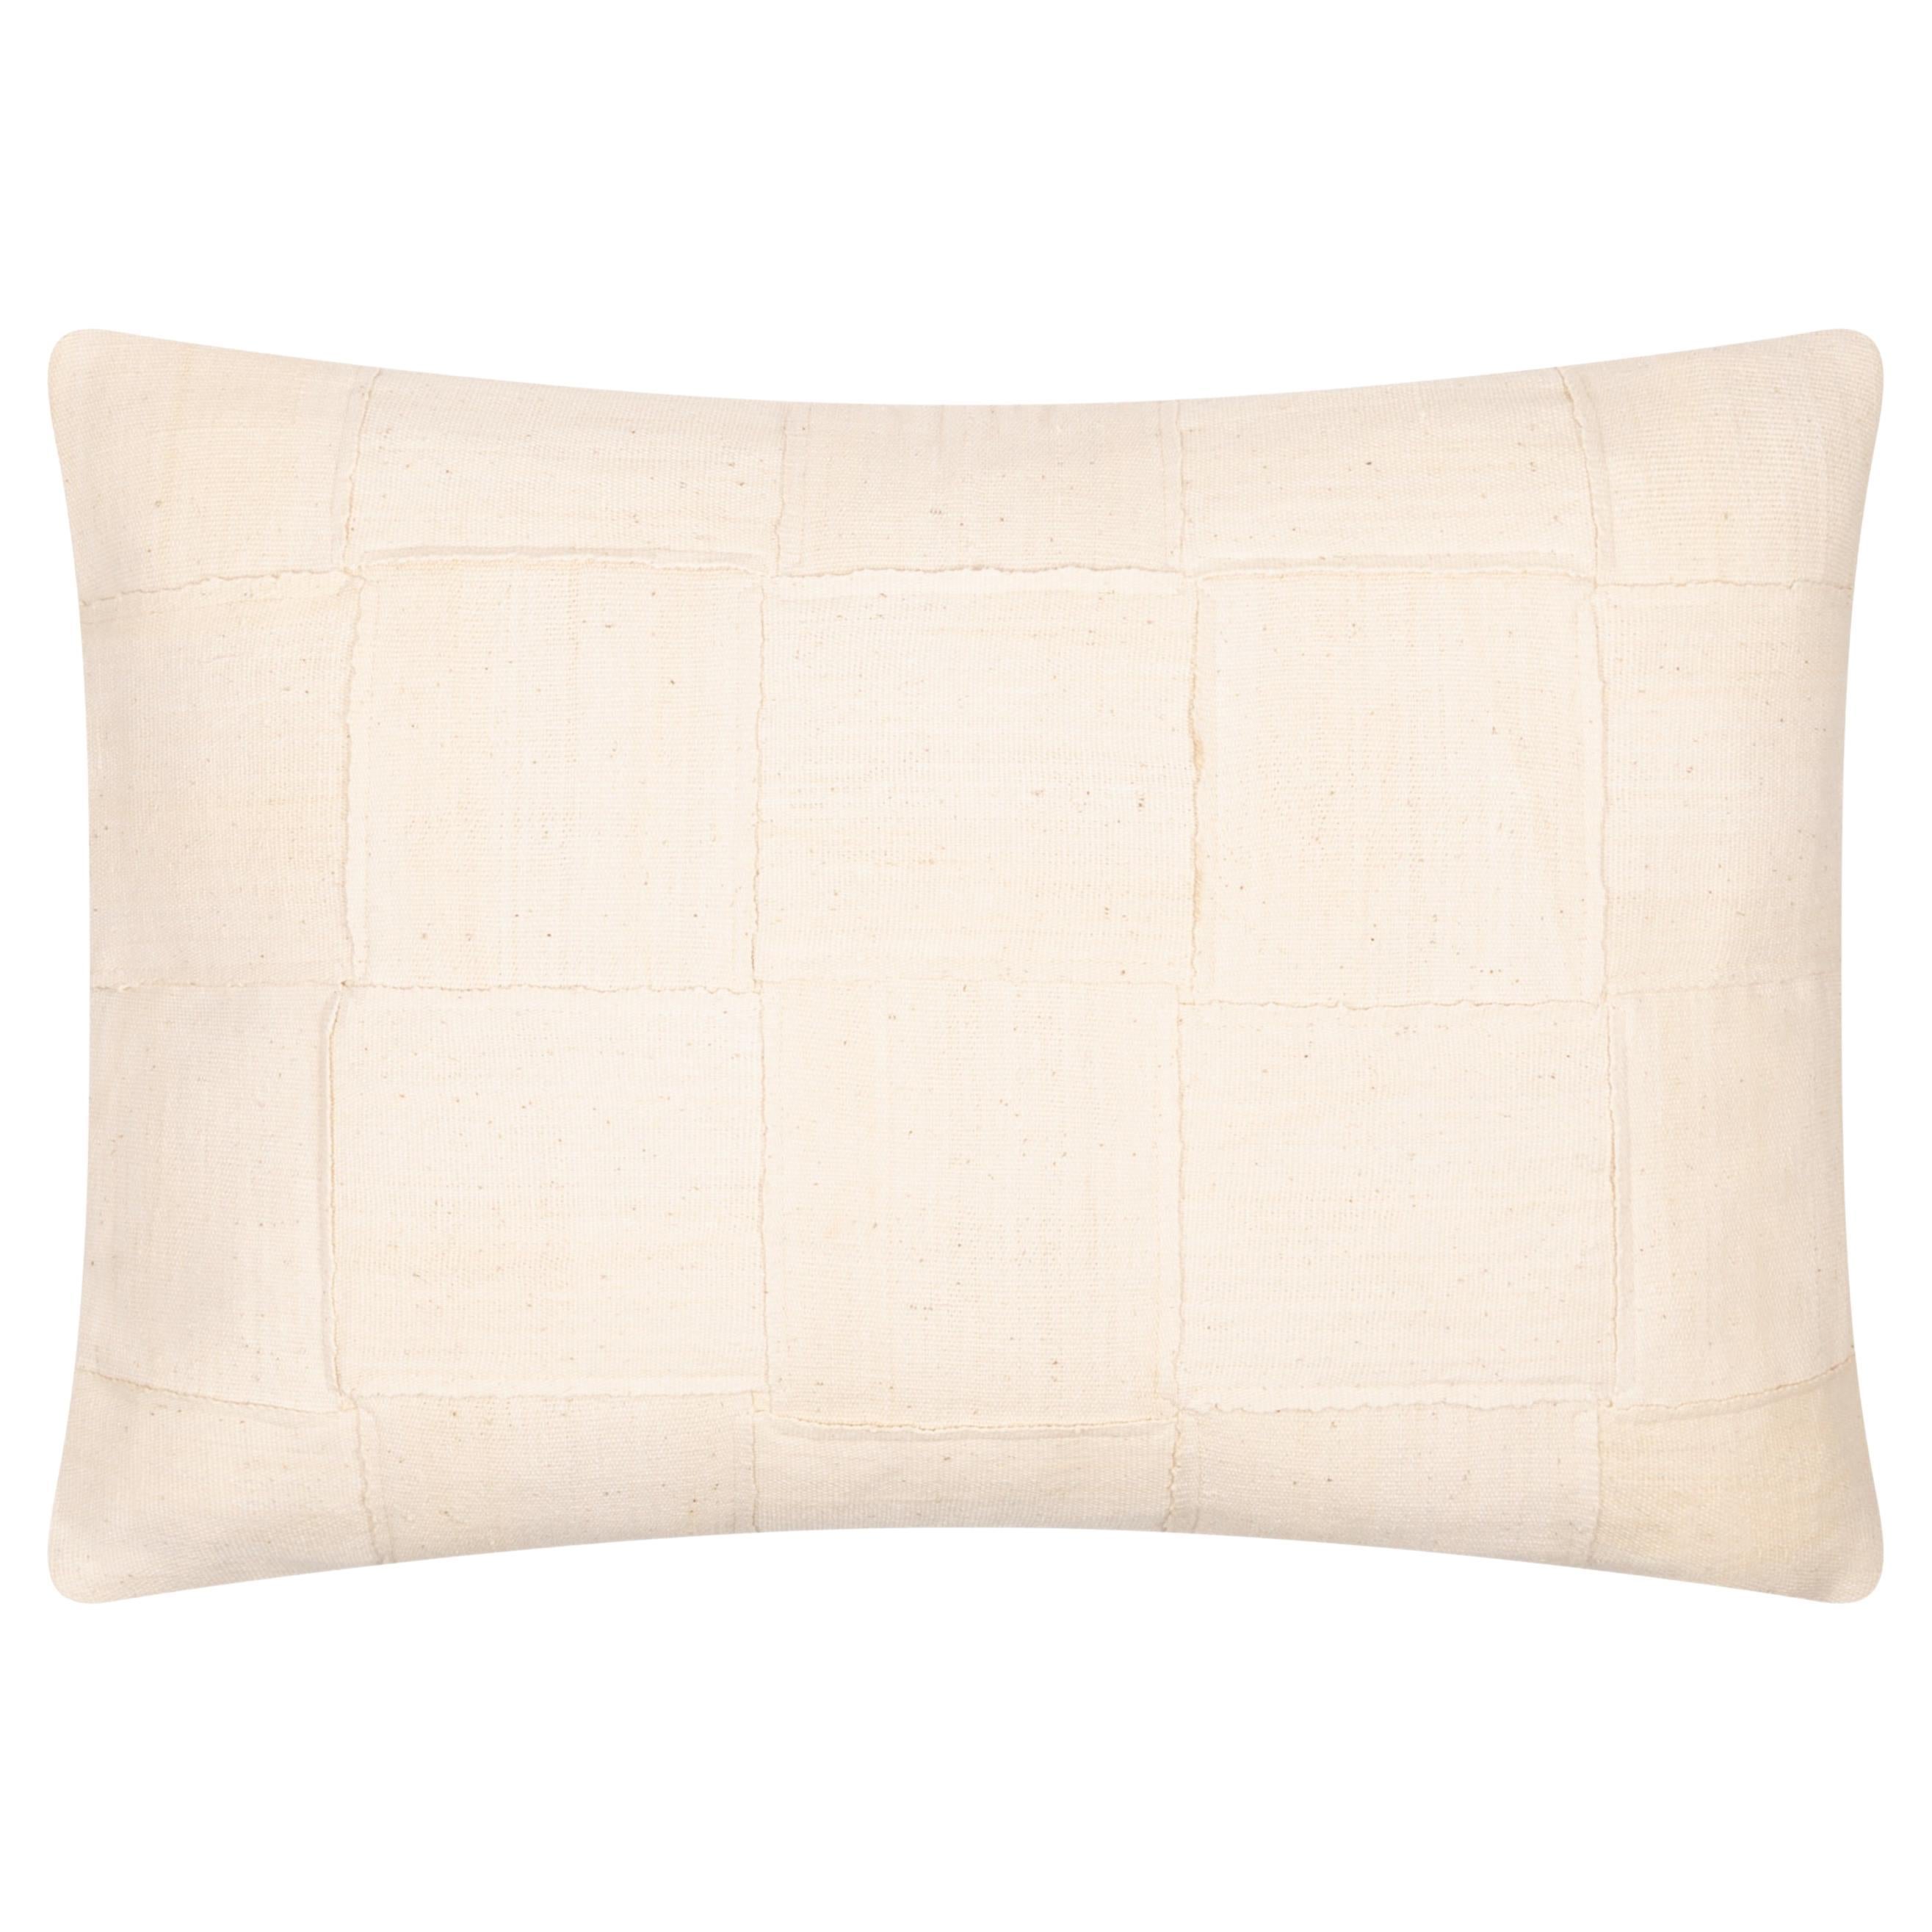 White Organic Cushion Cover Handwoven in Mali For Sale at 1stDibs